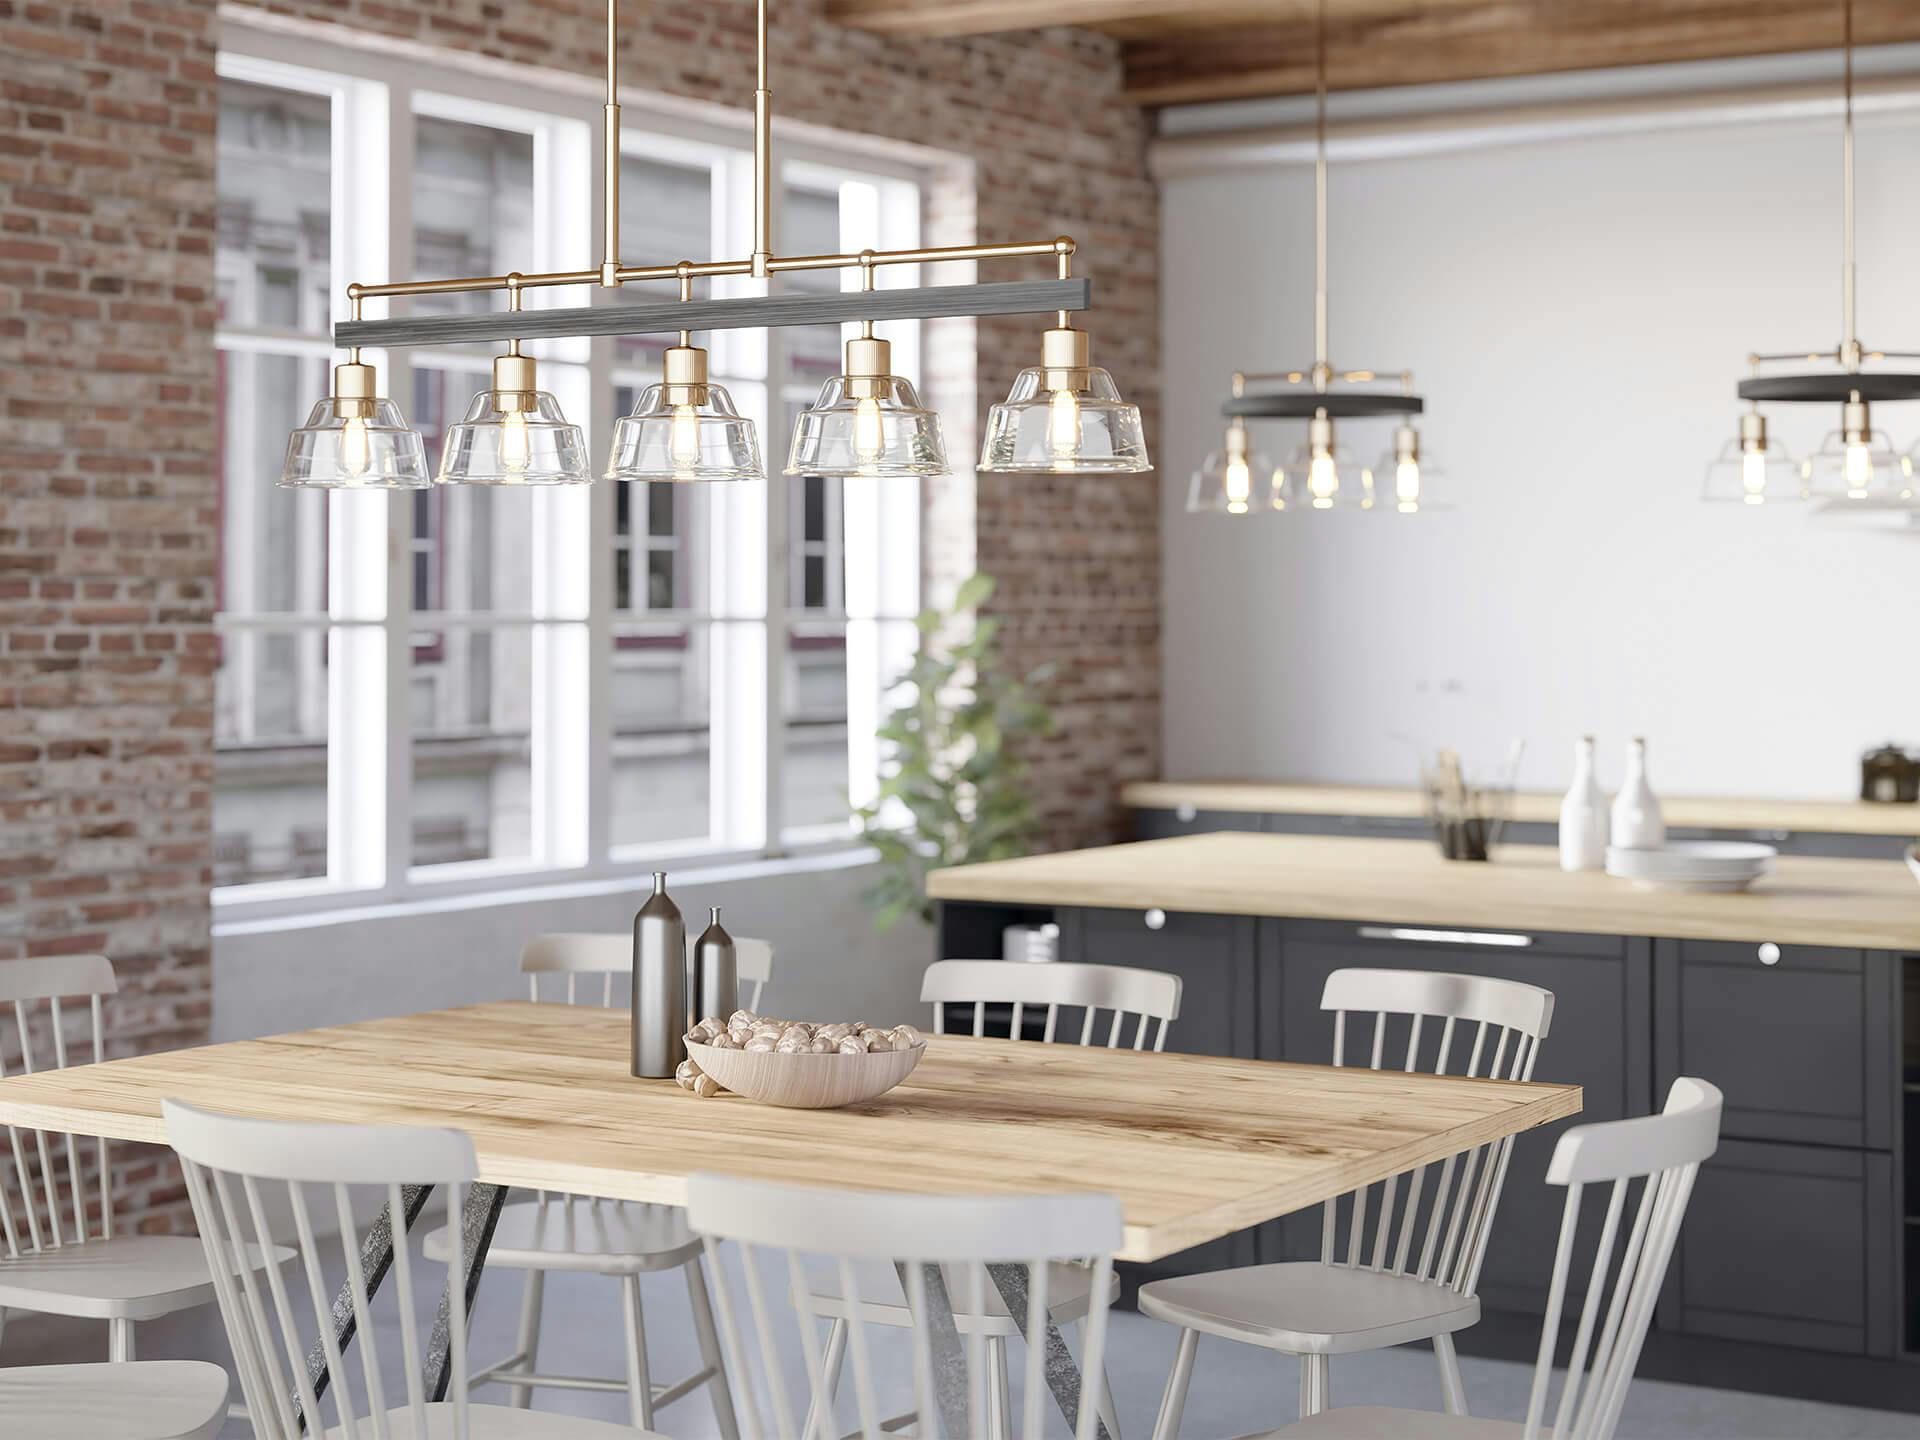 Kitchen setting with several Eastmont chandeliers across the dining room and island